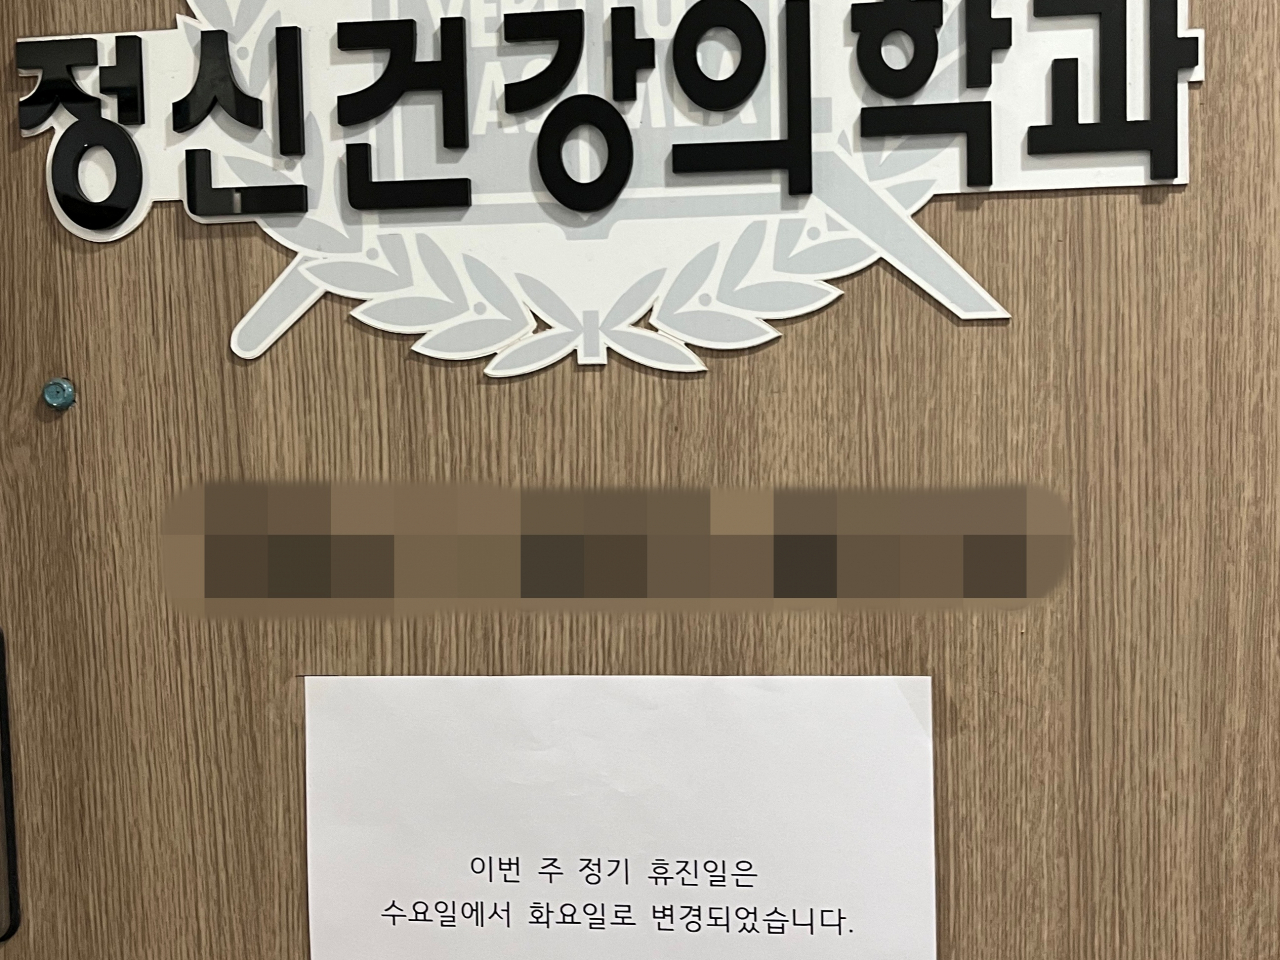 A notice at a psychiatric clinic in Nowon, Seoul, on Tuesday, says that the clinic is changing its regular day off from Wednesday to Tuesday for this week only. (Lee Jaeeun/The Korea Herald)